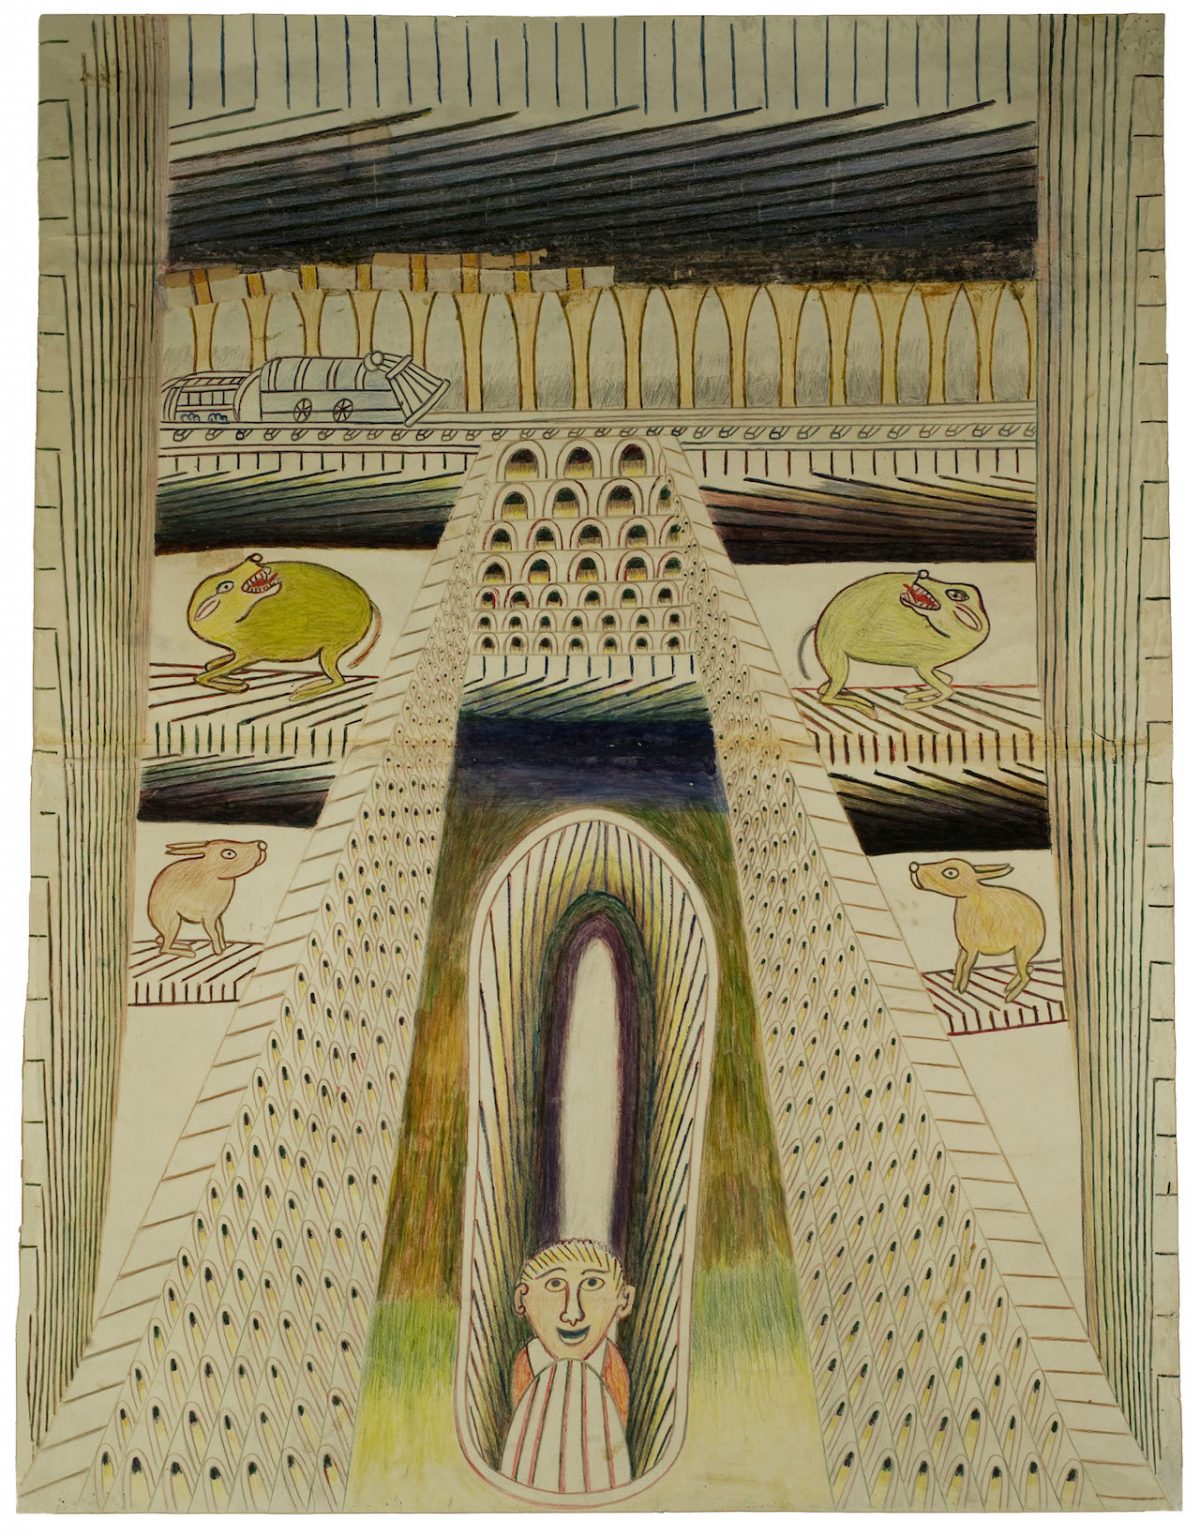 Martín Ramírez, “Untitled (Courtyard with Man and Animals)” (c. 1950-55), graphite, tempera and crayon on paper, 47 1/2 x 36 in